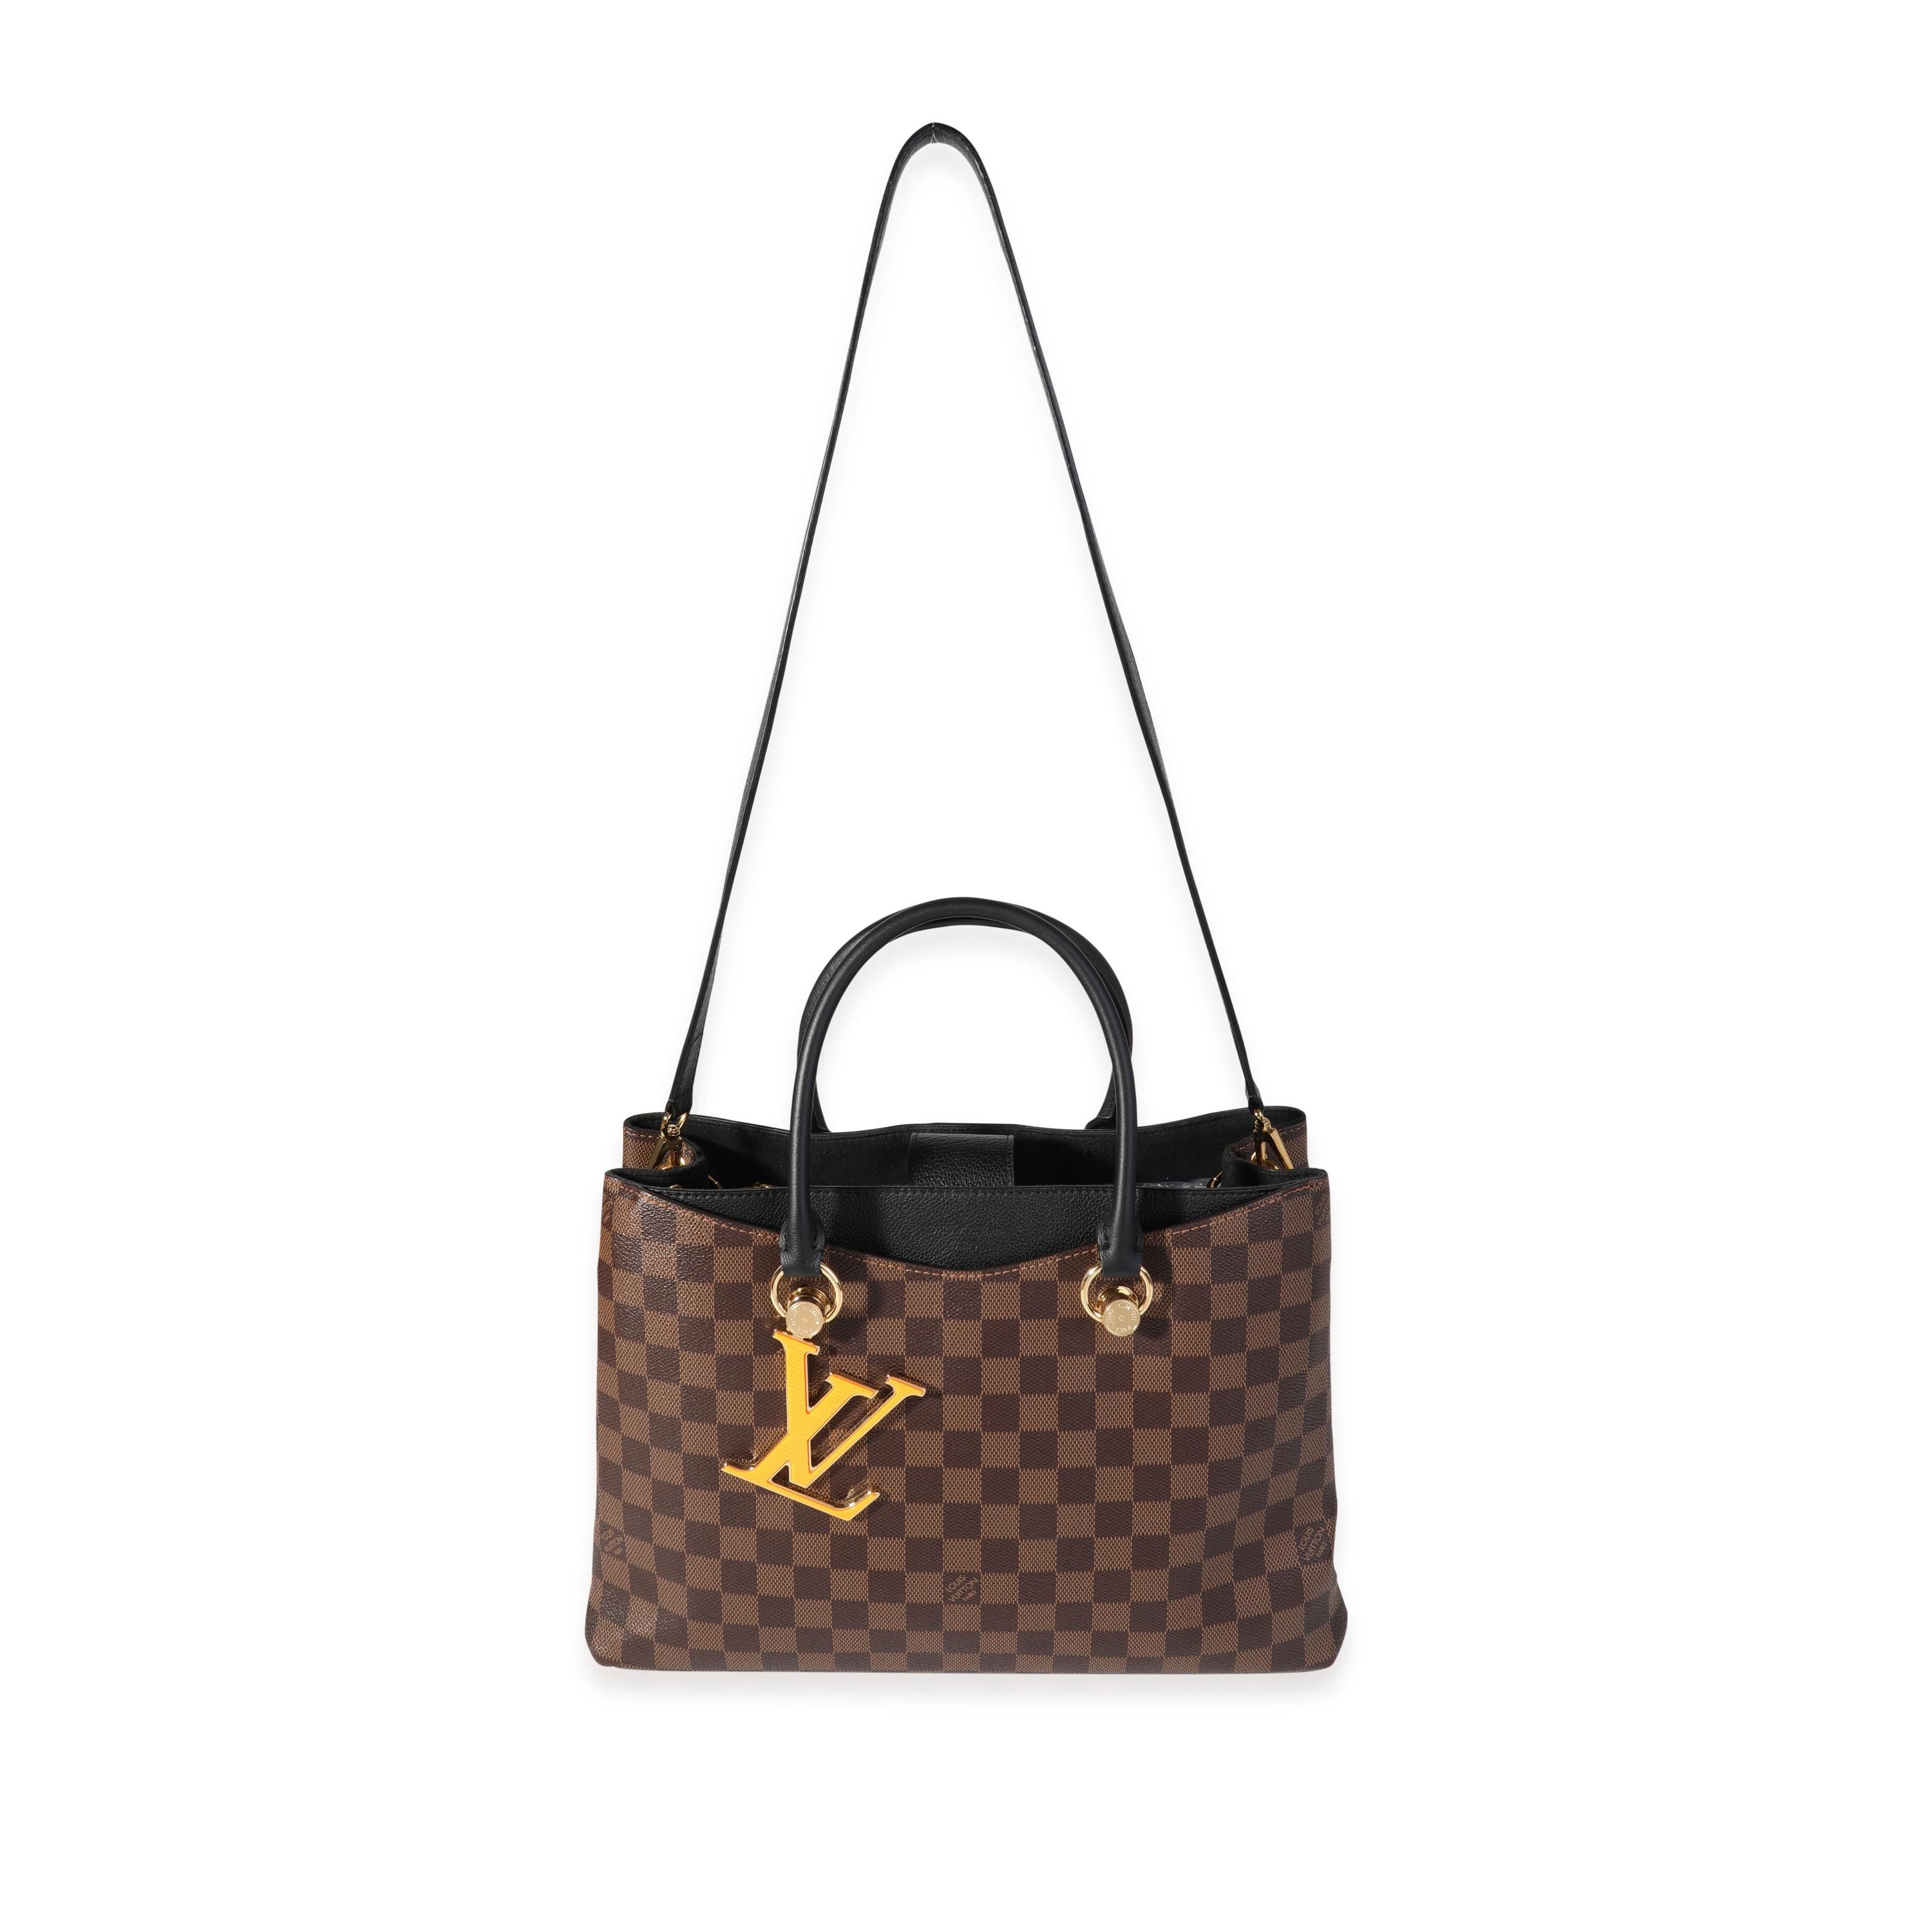 Listing Title: Louis Vuitton Brown Damier Ebene LV Riverside Bag
SKU: 119634
MSRP: 2980.00
Condition: Pre-owned (3000)
Handbag Condition: Very Good
Condition Comments: Light scuffs at exterior corners and feet hardware. Minor wear and pilling at